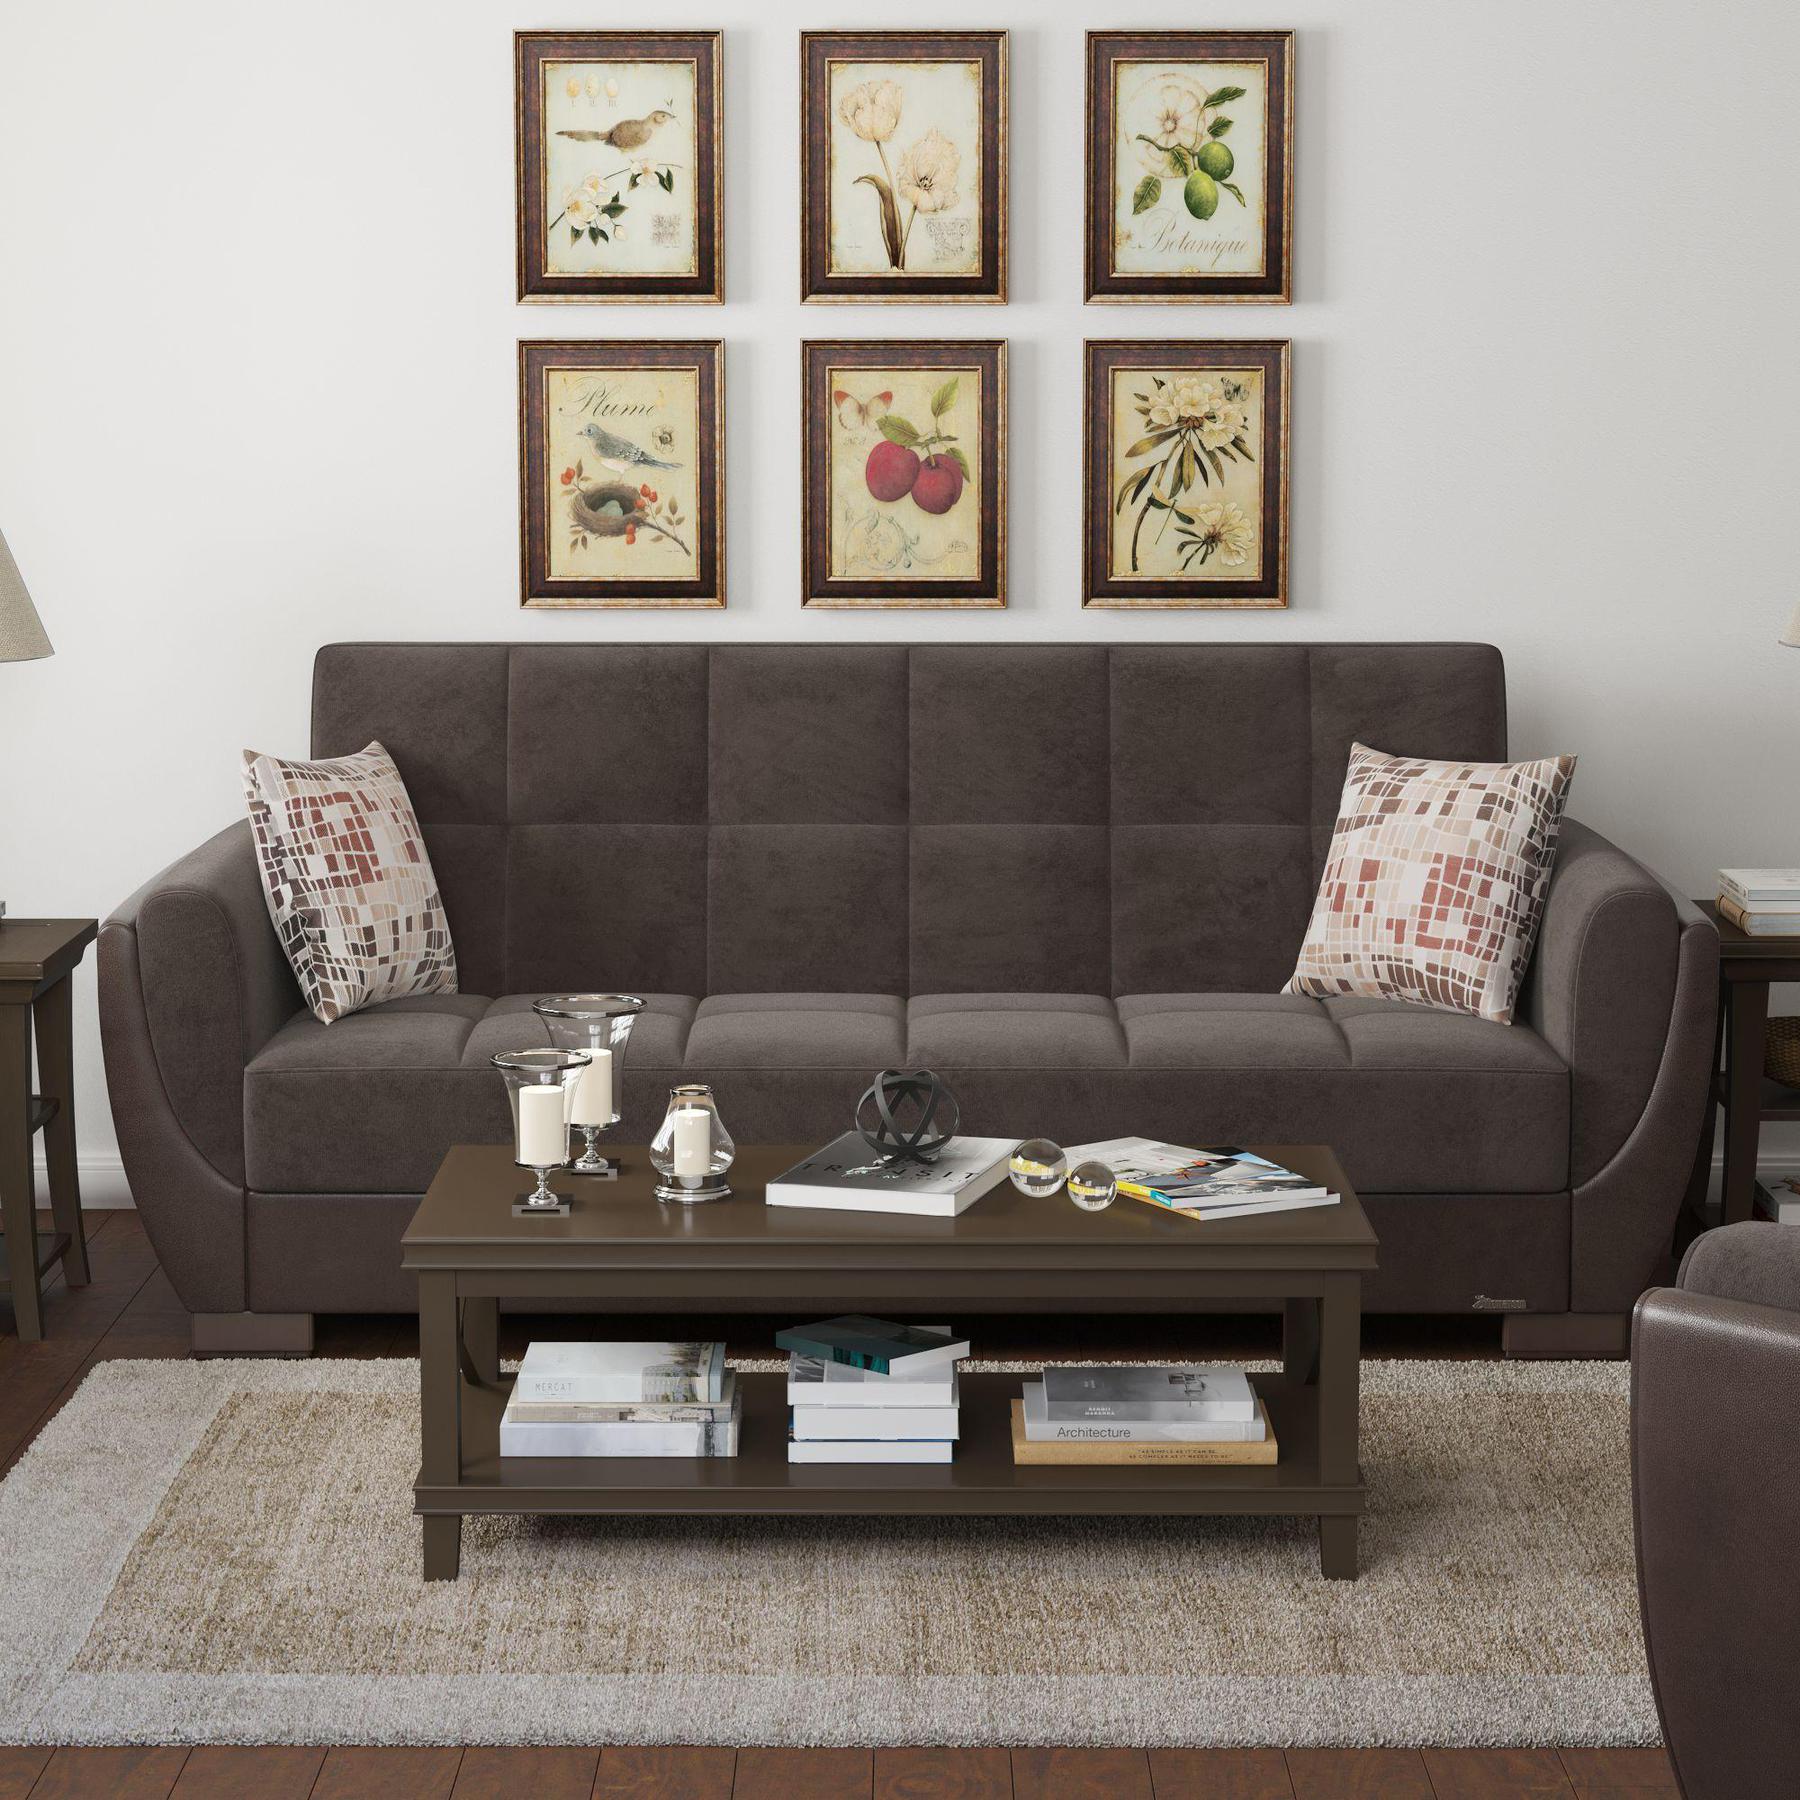 Modern design, Friar Brown, Dark Brown , Microfiber, Artificial Leather upholstered convertible sleeper Sofabed with underseat storage from Voyage Shelter by Ottomanson in living room lifestyle setting by itself. This Sofabed measures 94 inches width by 36 inches depth by 41 inches height.